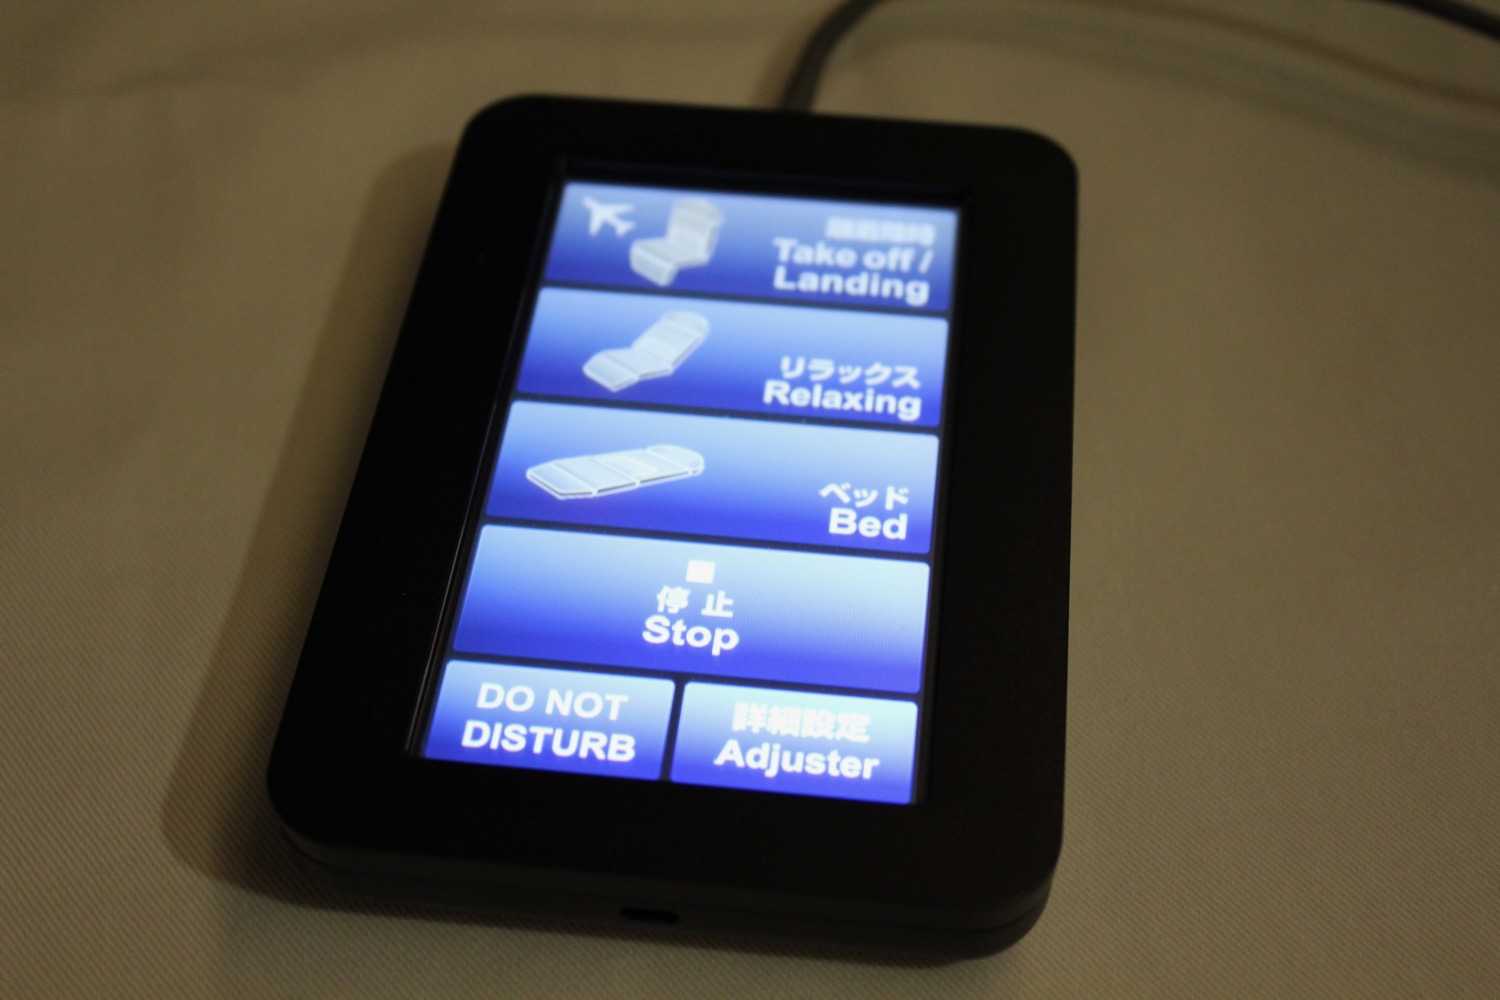 a black rectangular device with blue text on it